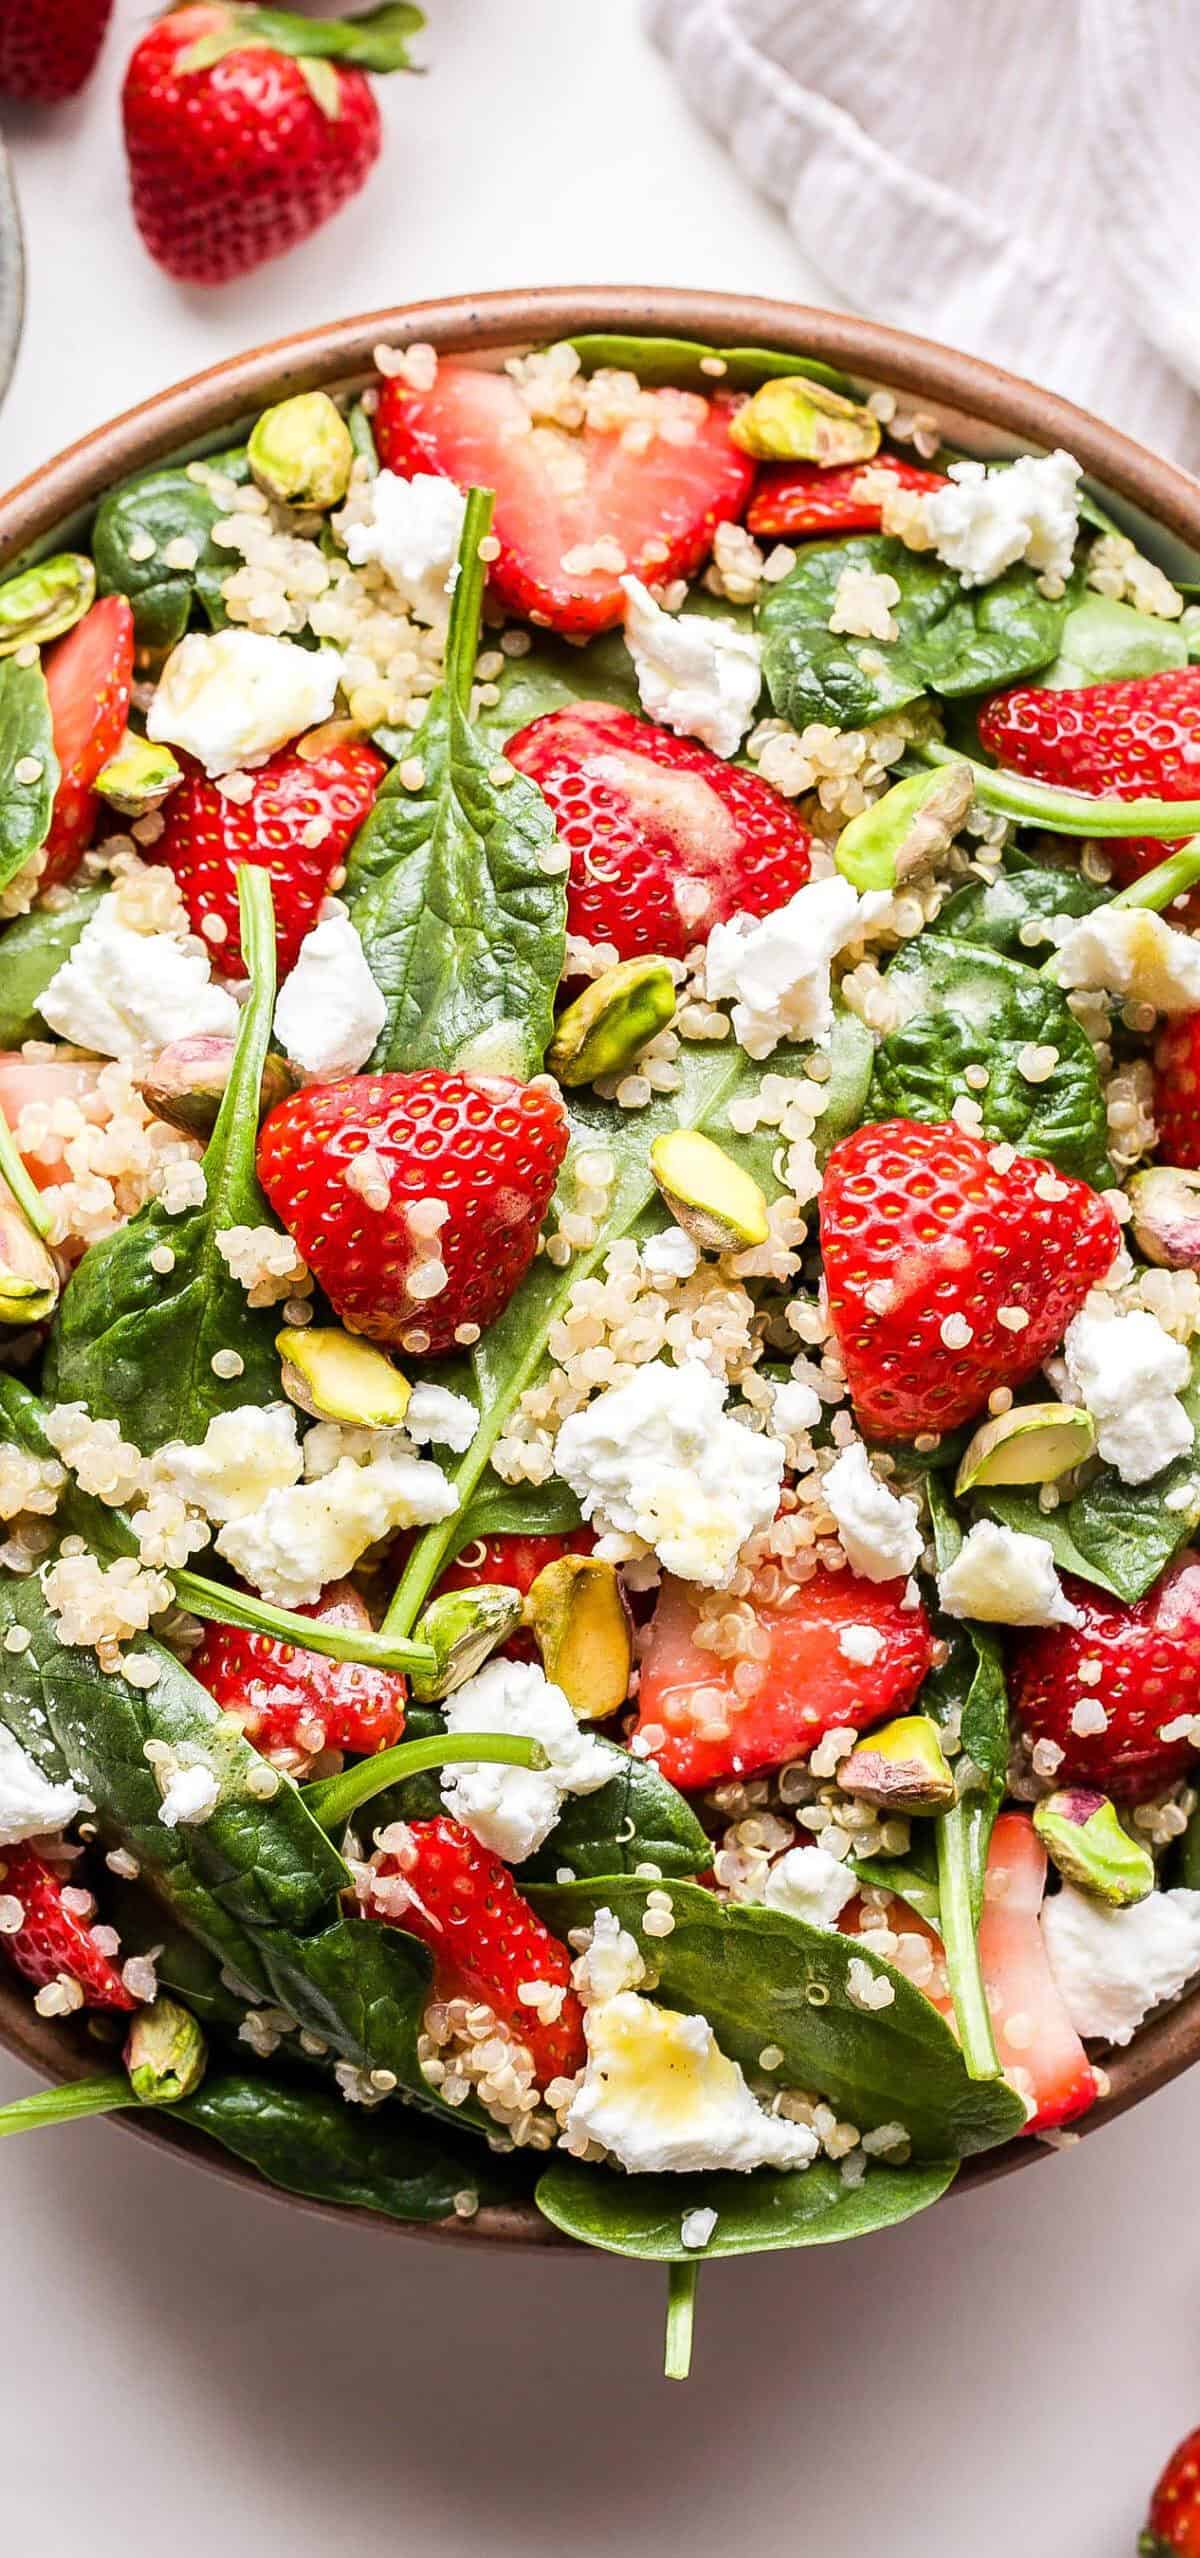  Let strawberries elevate your salad to the next level.